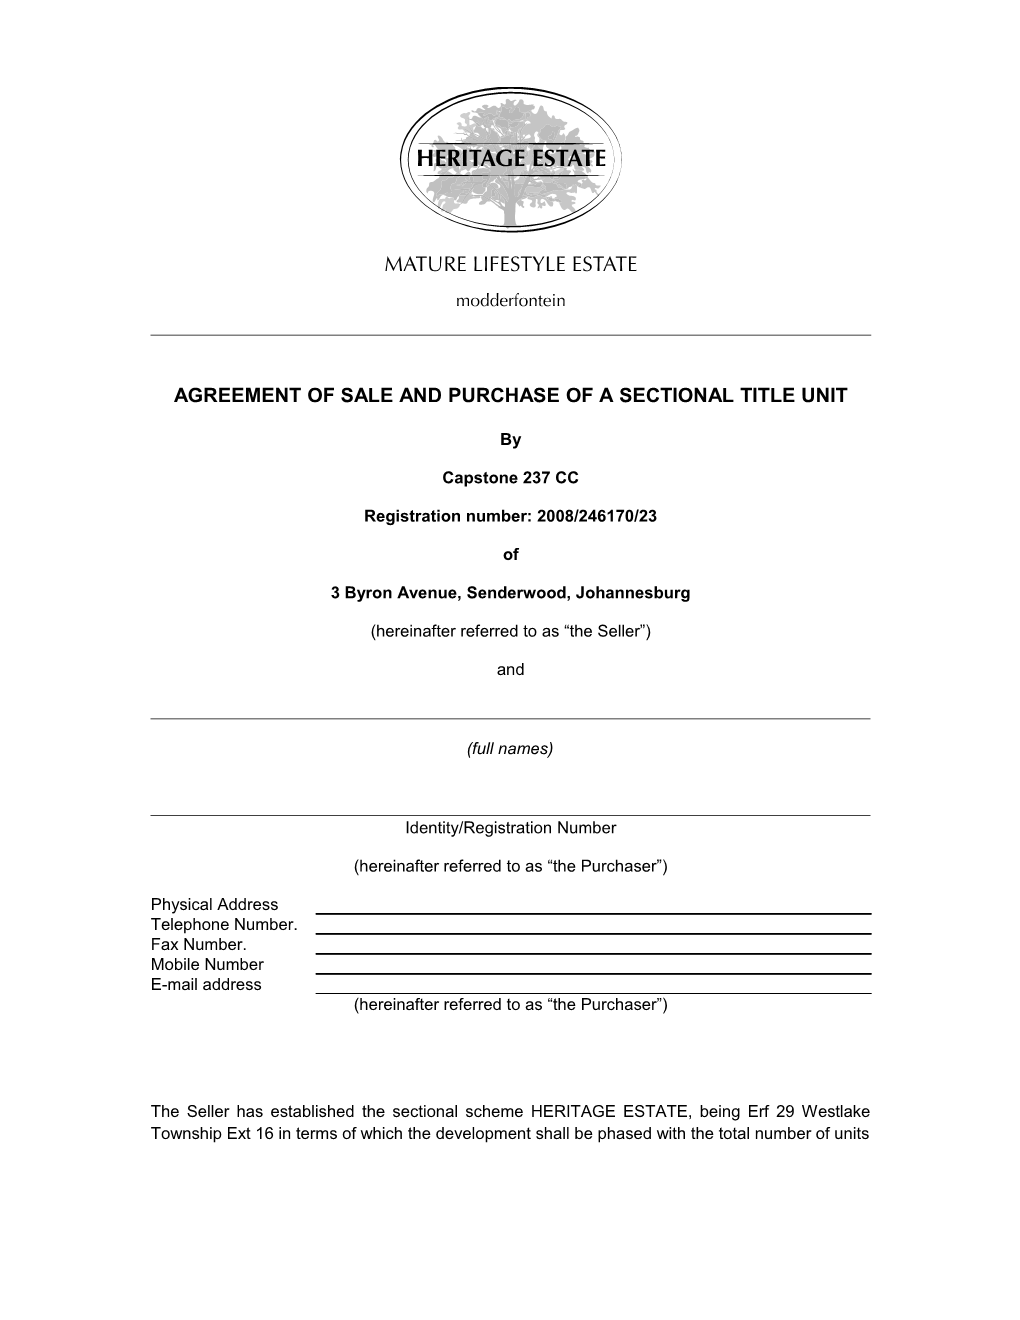 Agreement of Sale and Purchase of a Sectional Title Unit